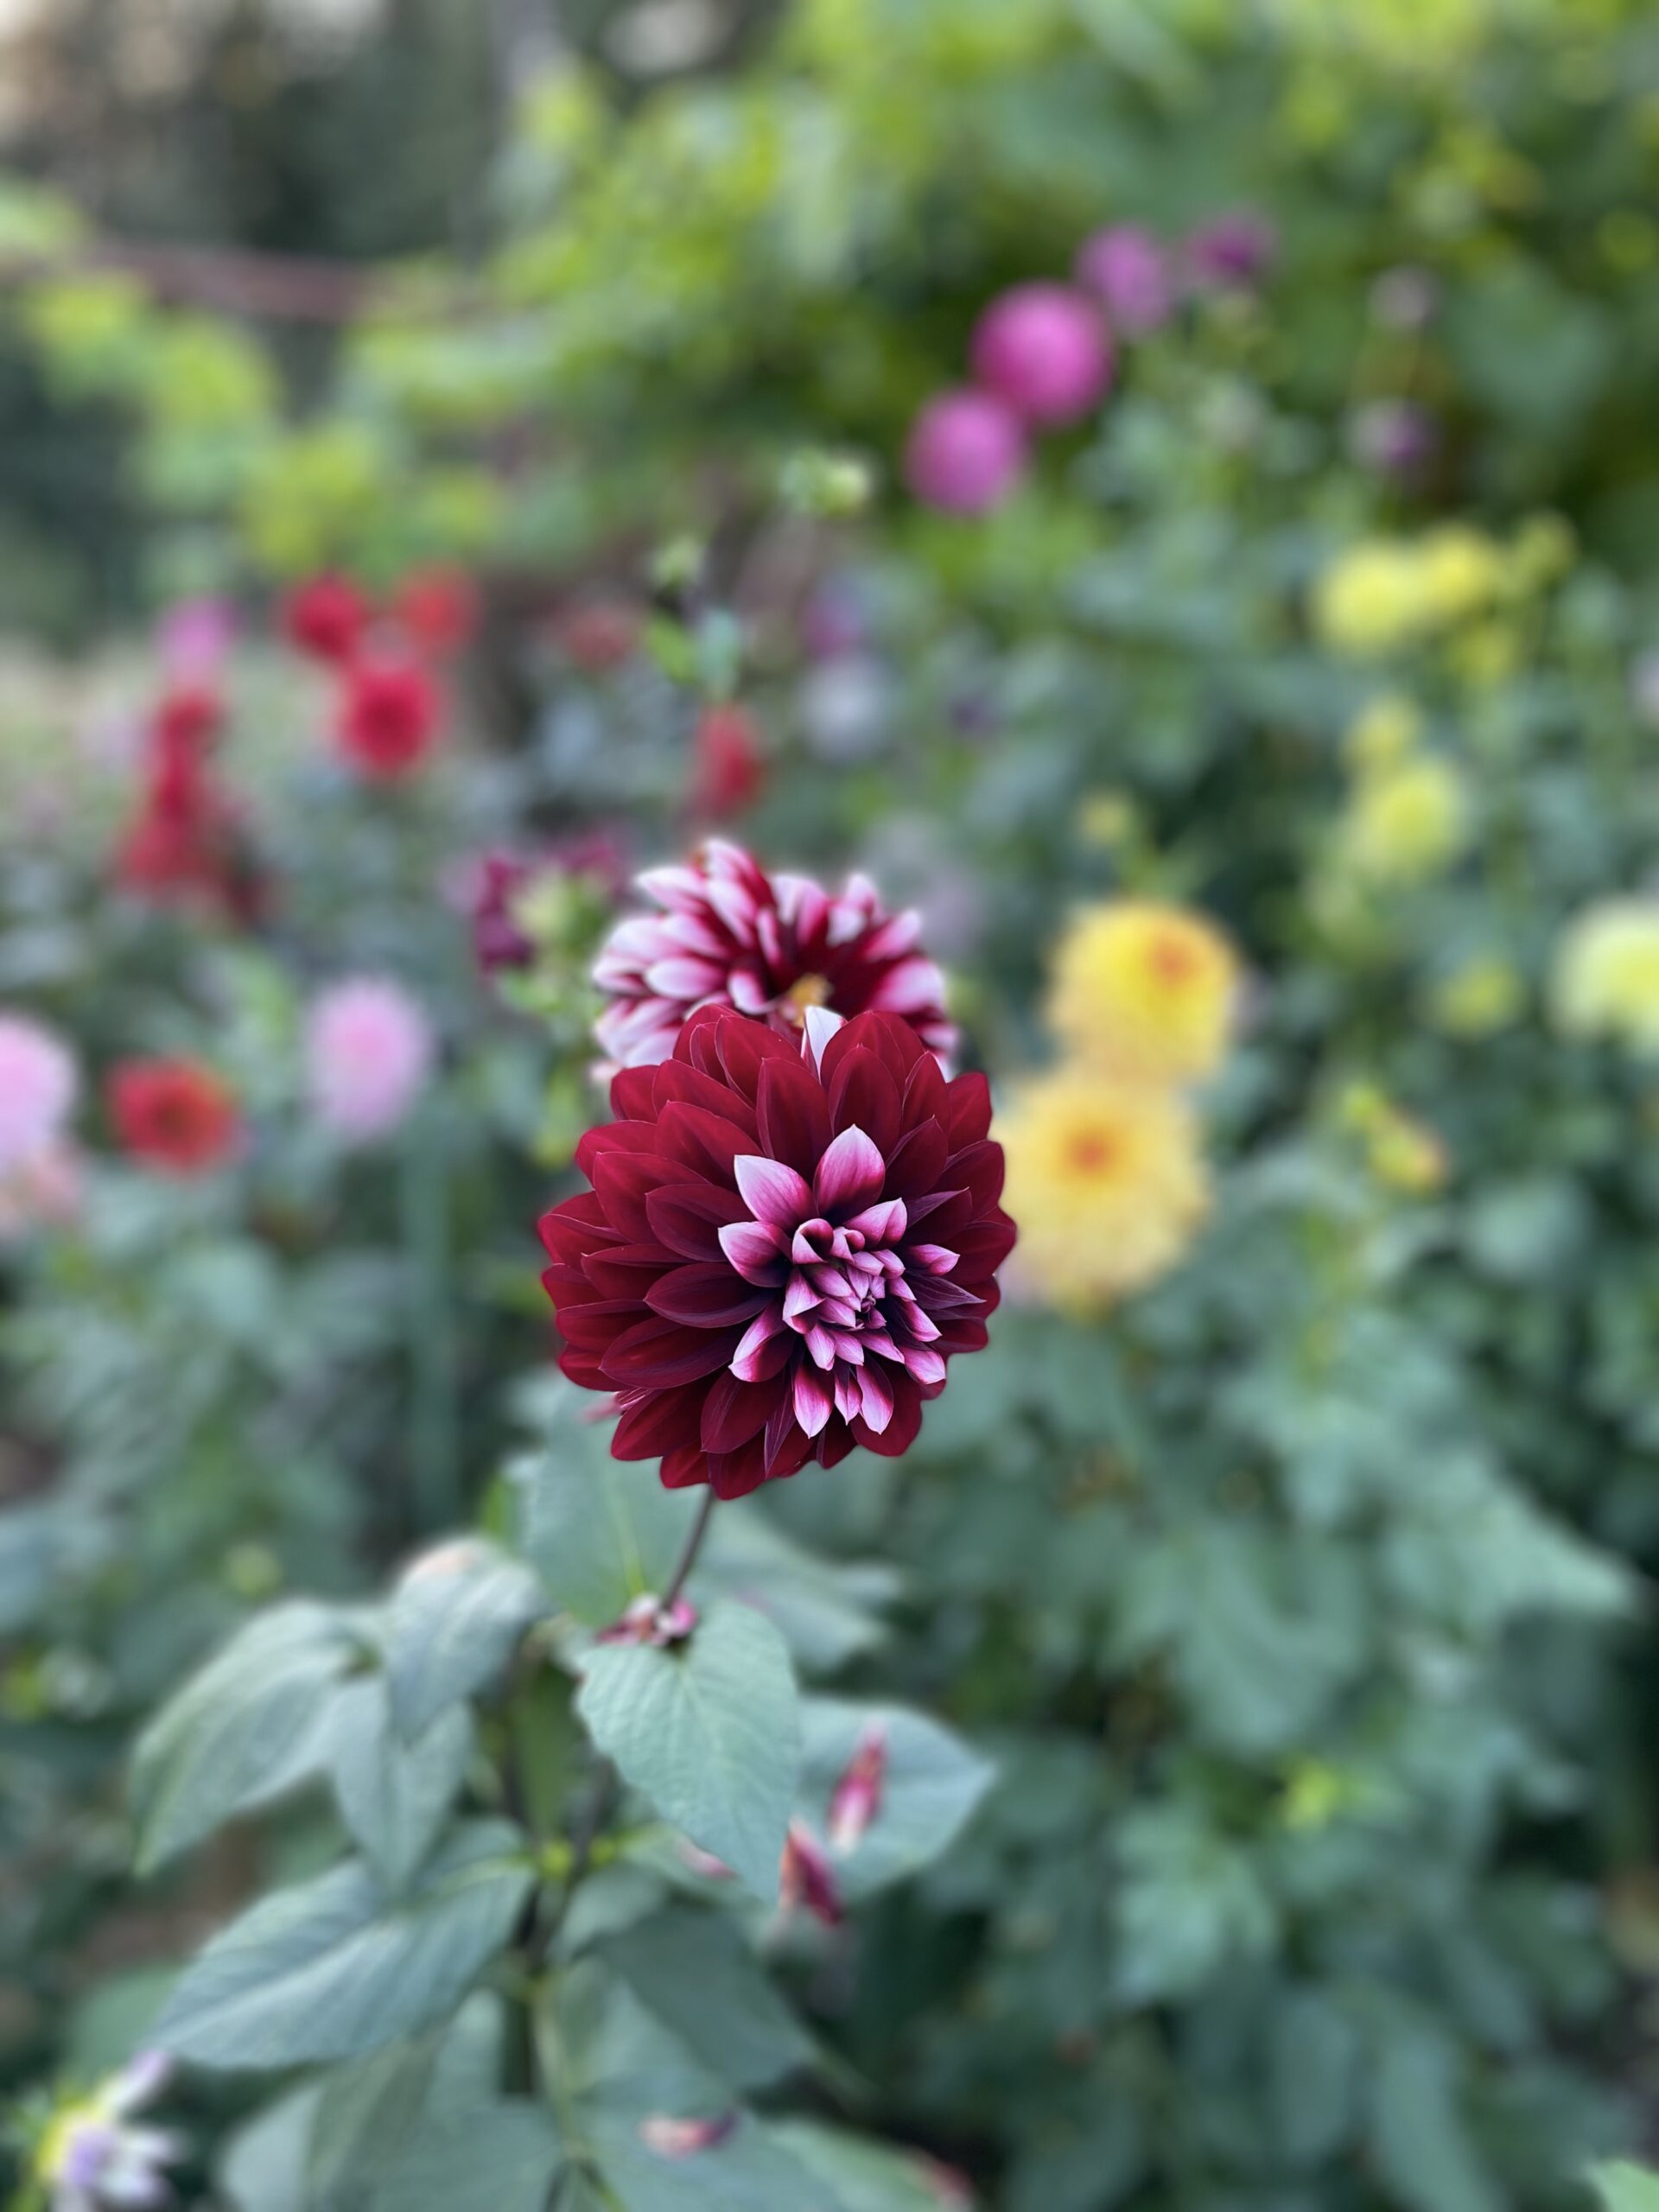 Taken in a studio mode, the flowers are in focus, but everything in the background is blurred. This picture shows two blooms in the center of deep dark red with a few white petals in the center.